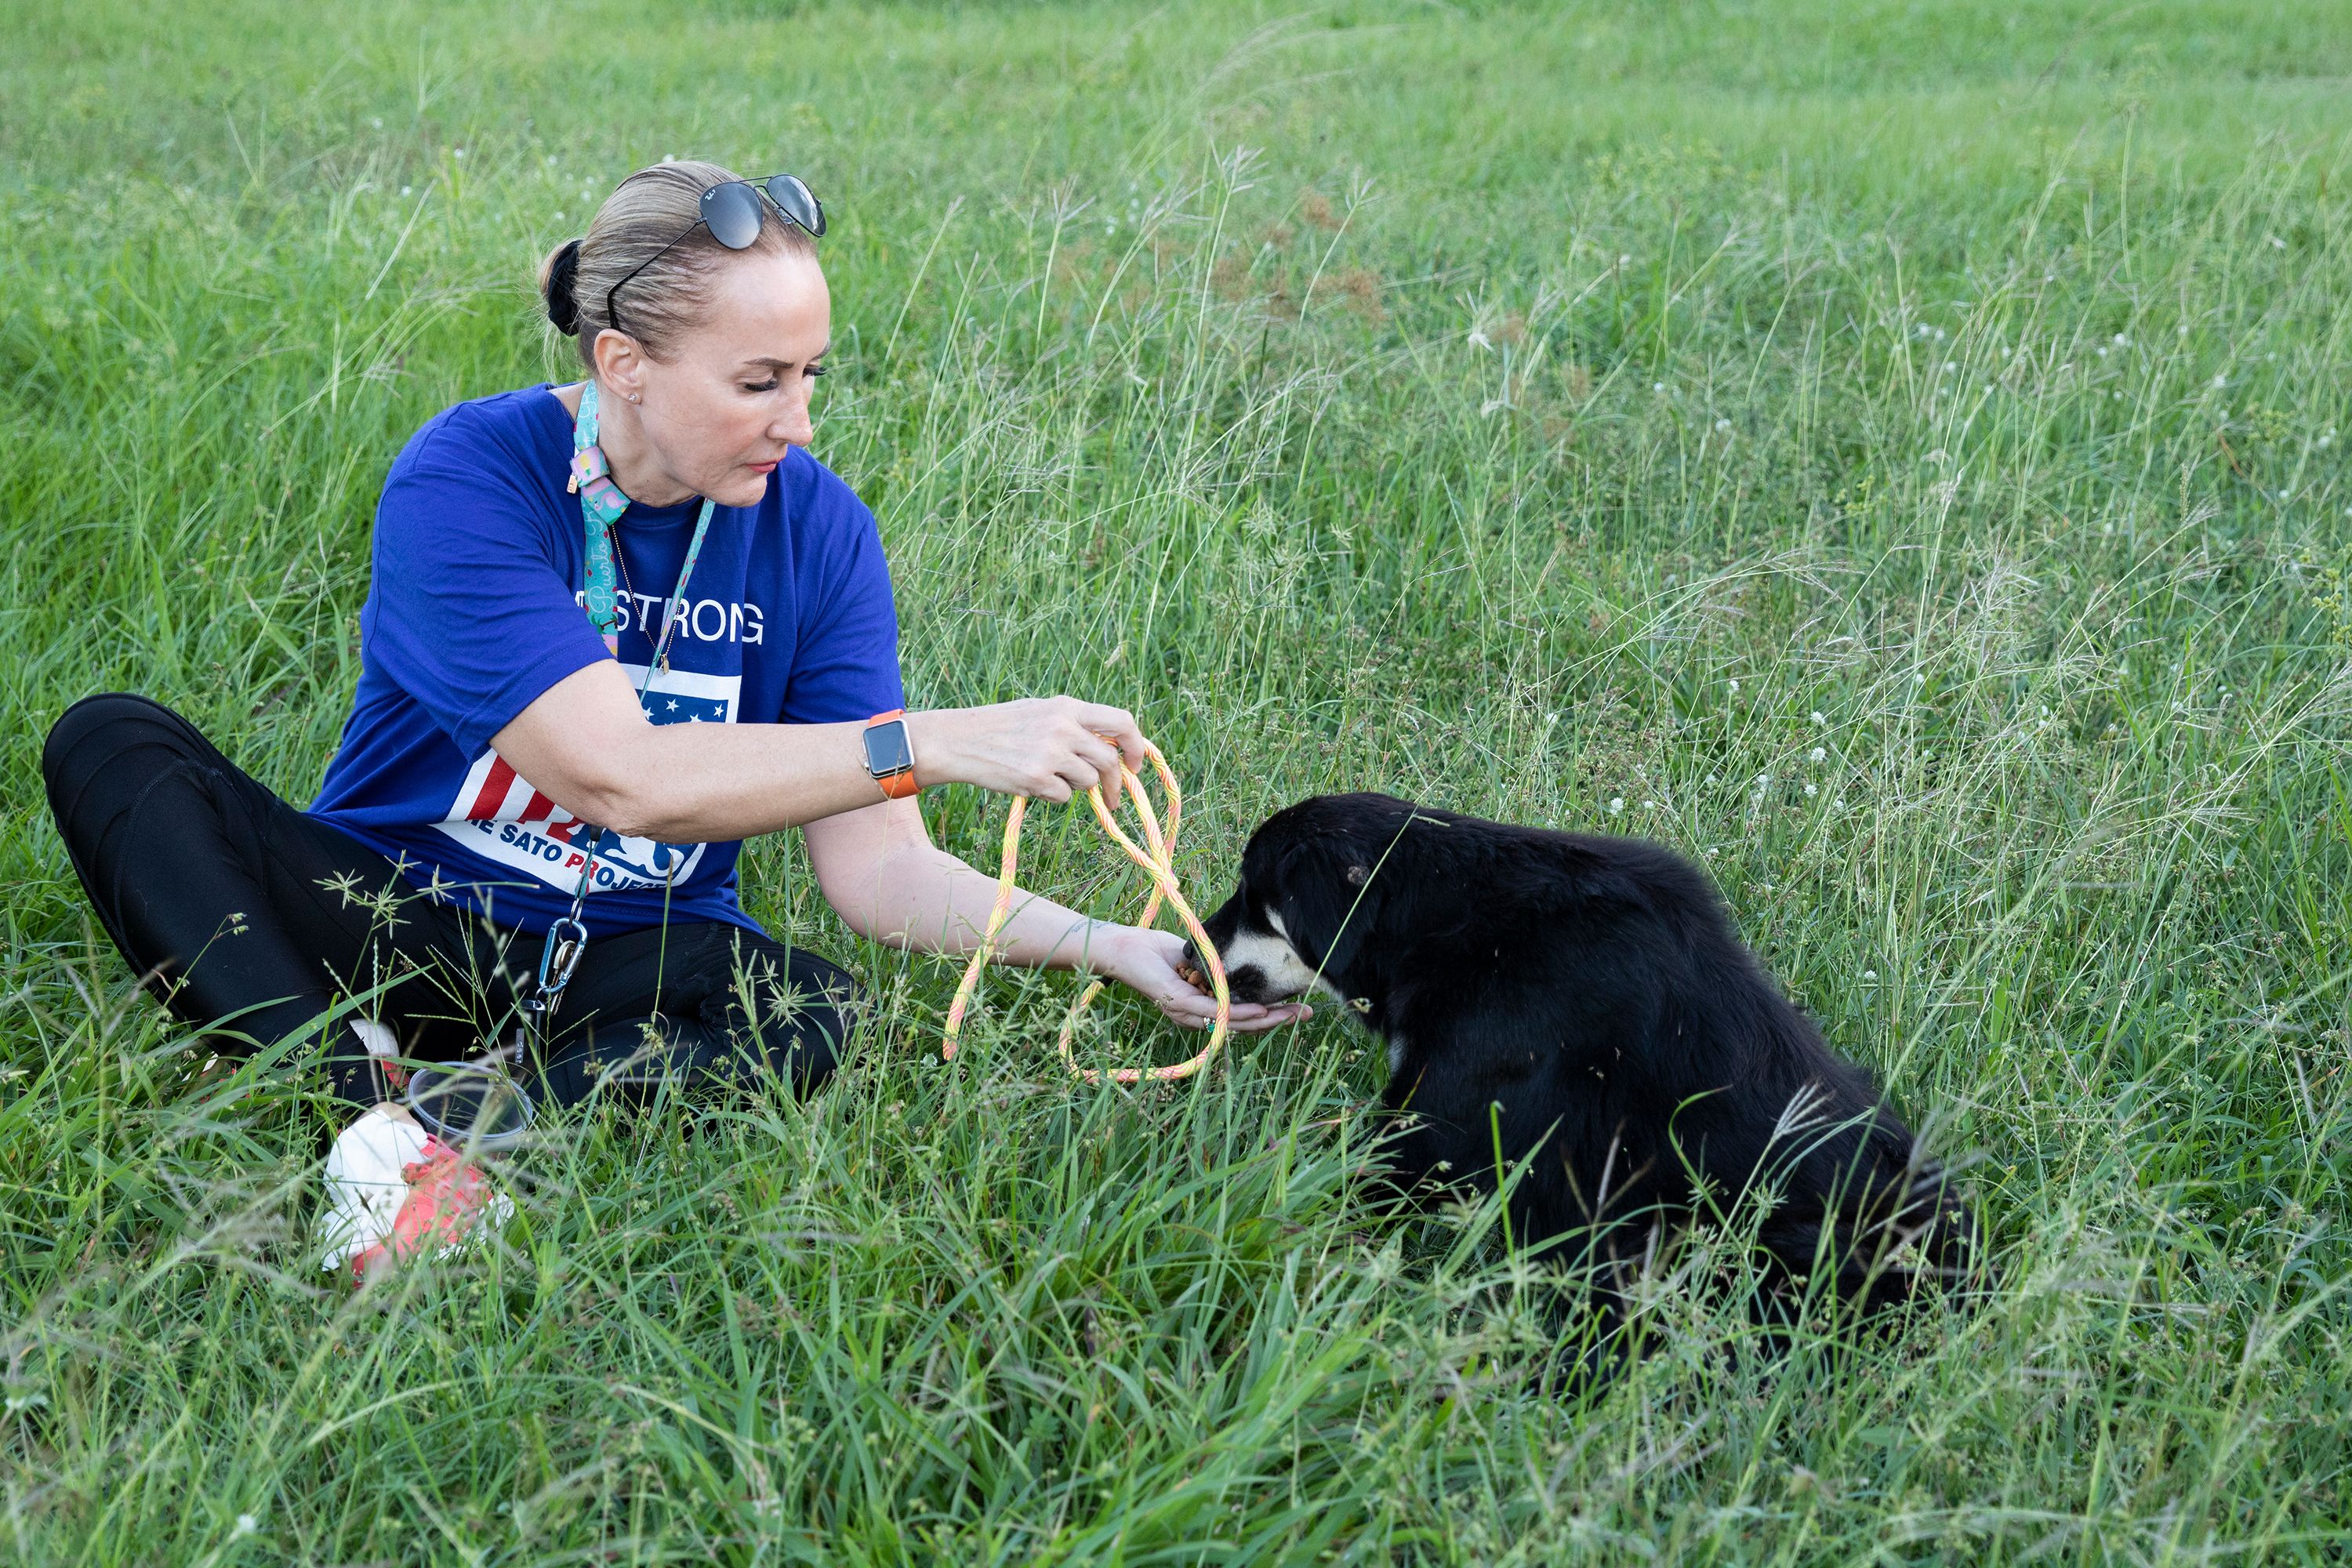 Using the food as a distraction, Beckles places her hand through the leash to loop it around the dog’s neck. Image by Jamie Holt. United States, 2019.